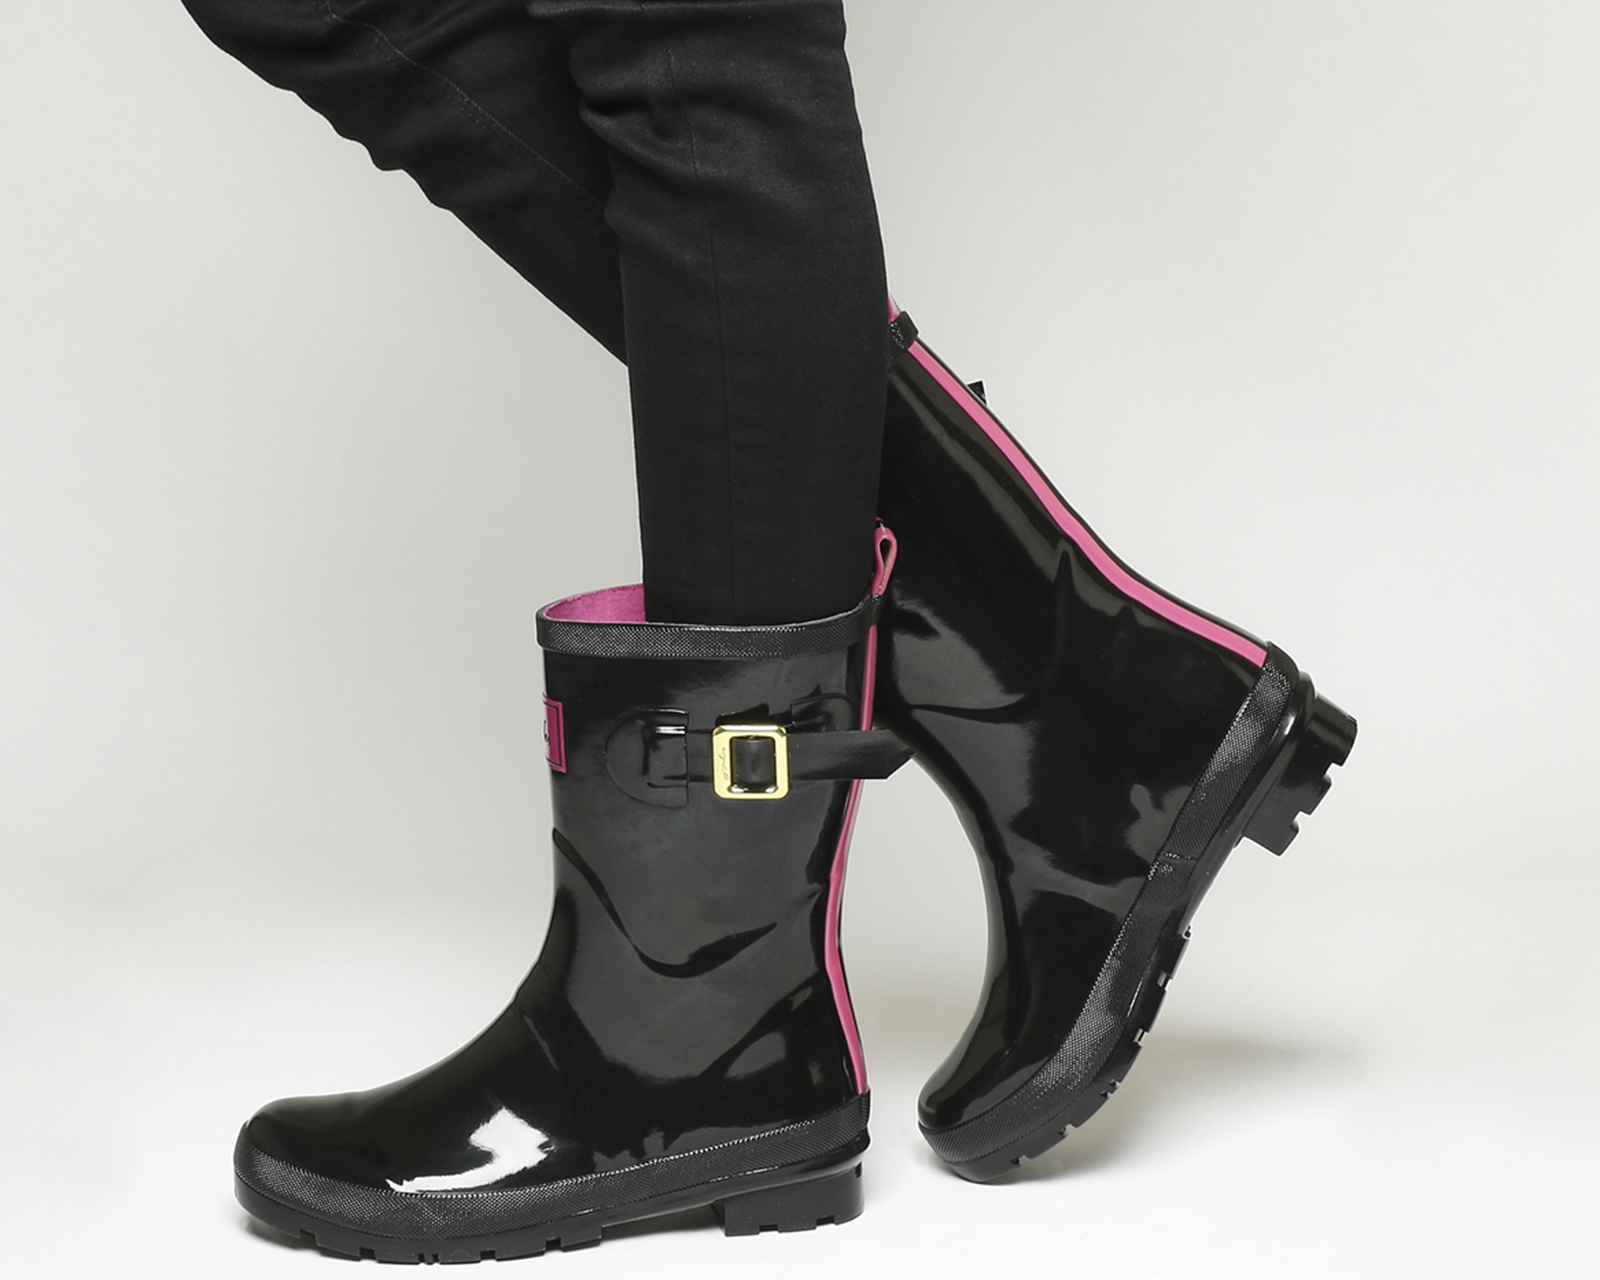 black wellie boots